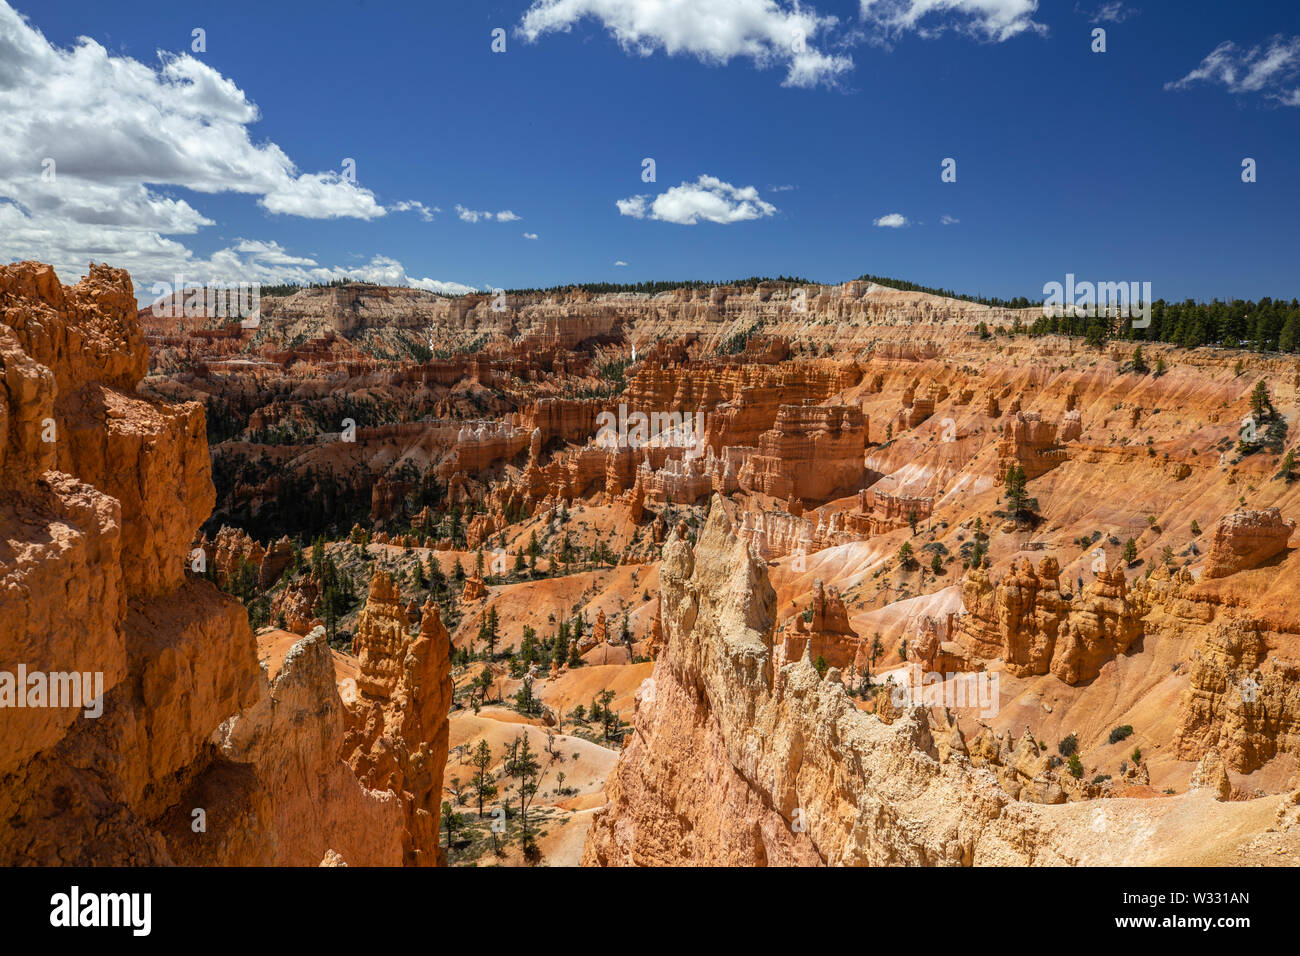 Hoodoo rock formations at Bryce Canyon National Park, Utah, United States of America Banque D'Images